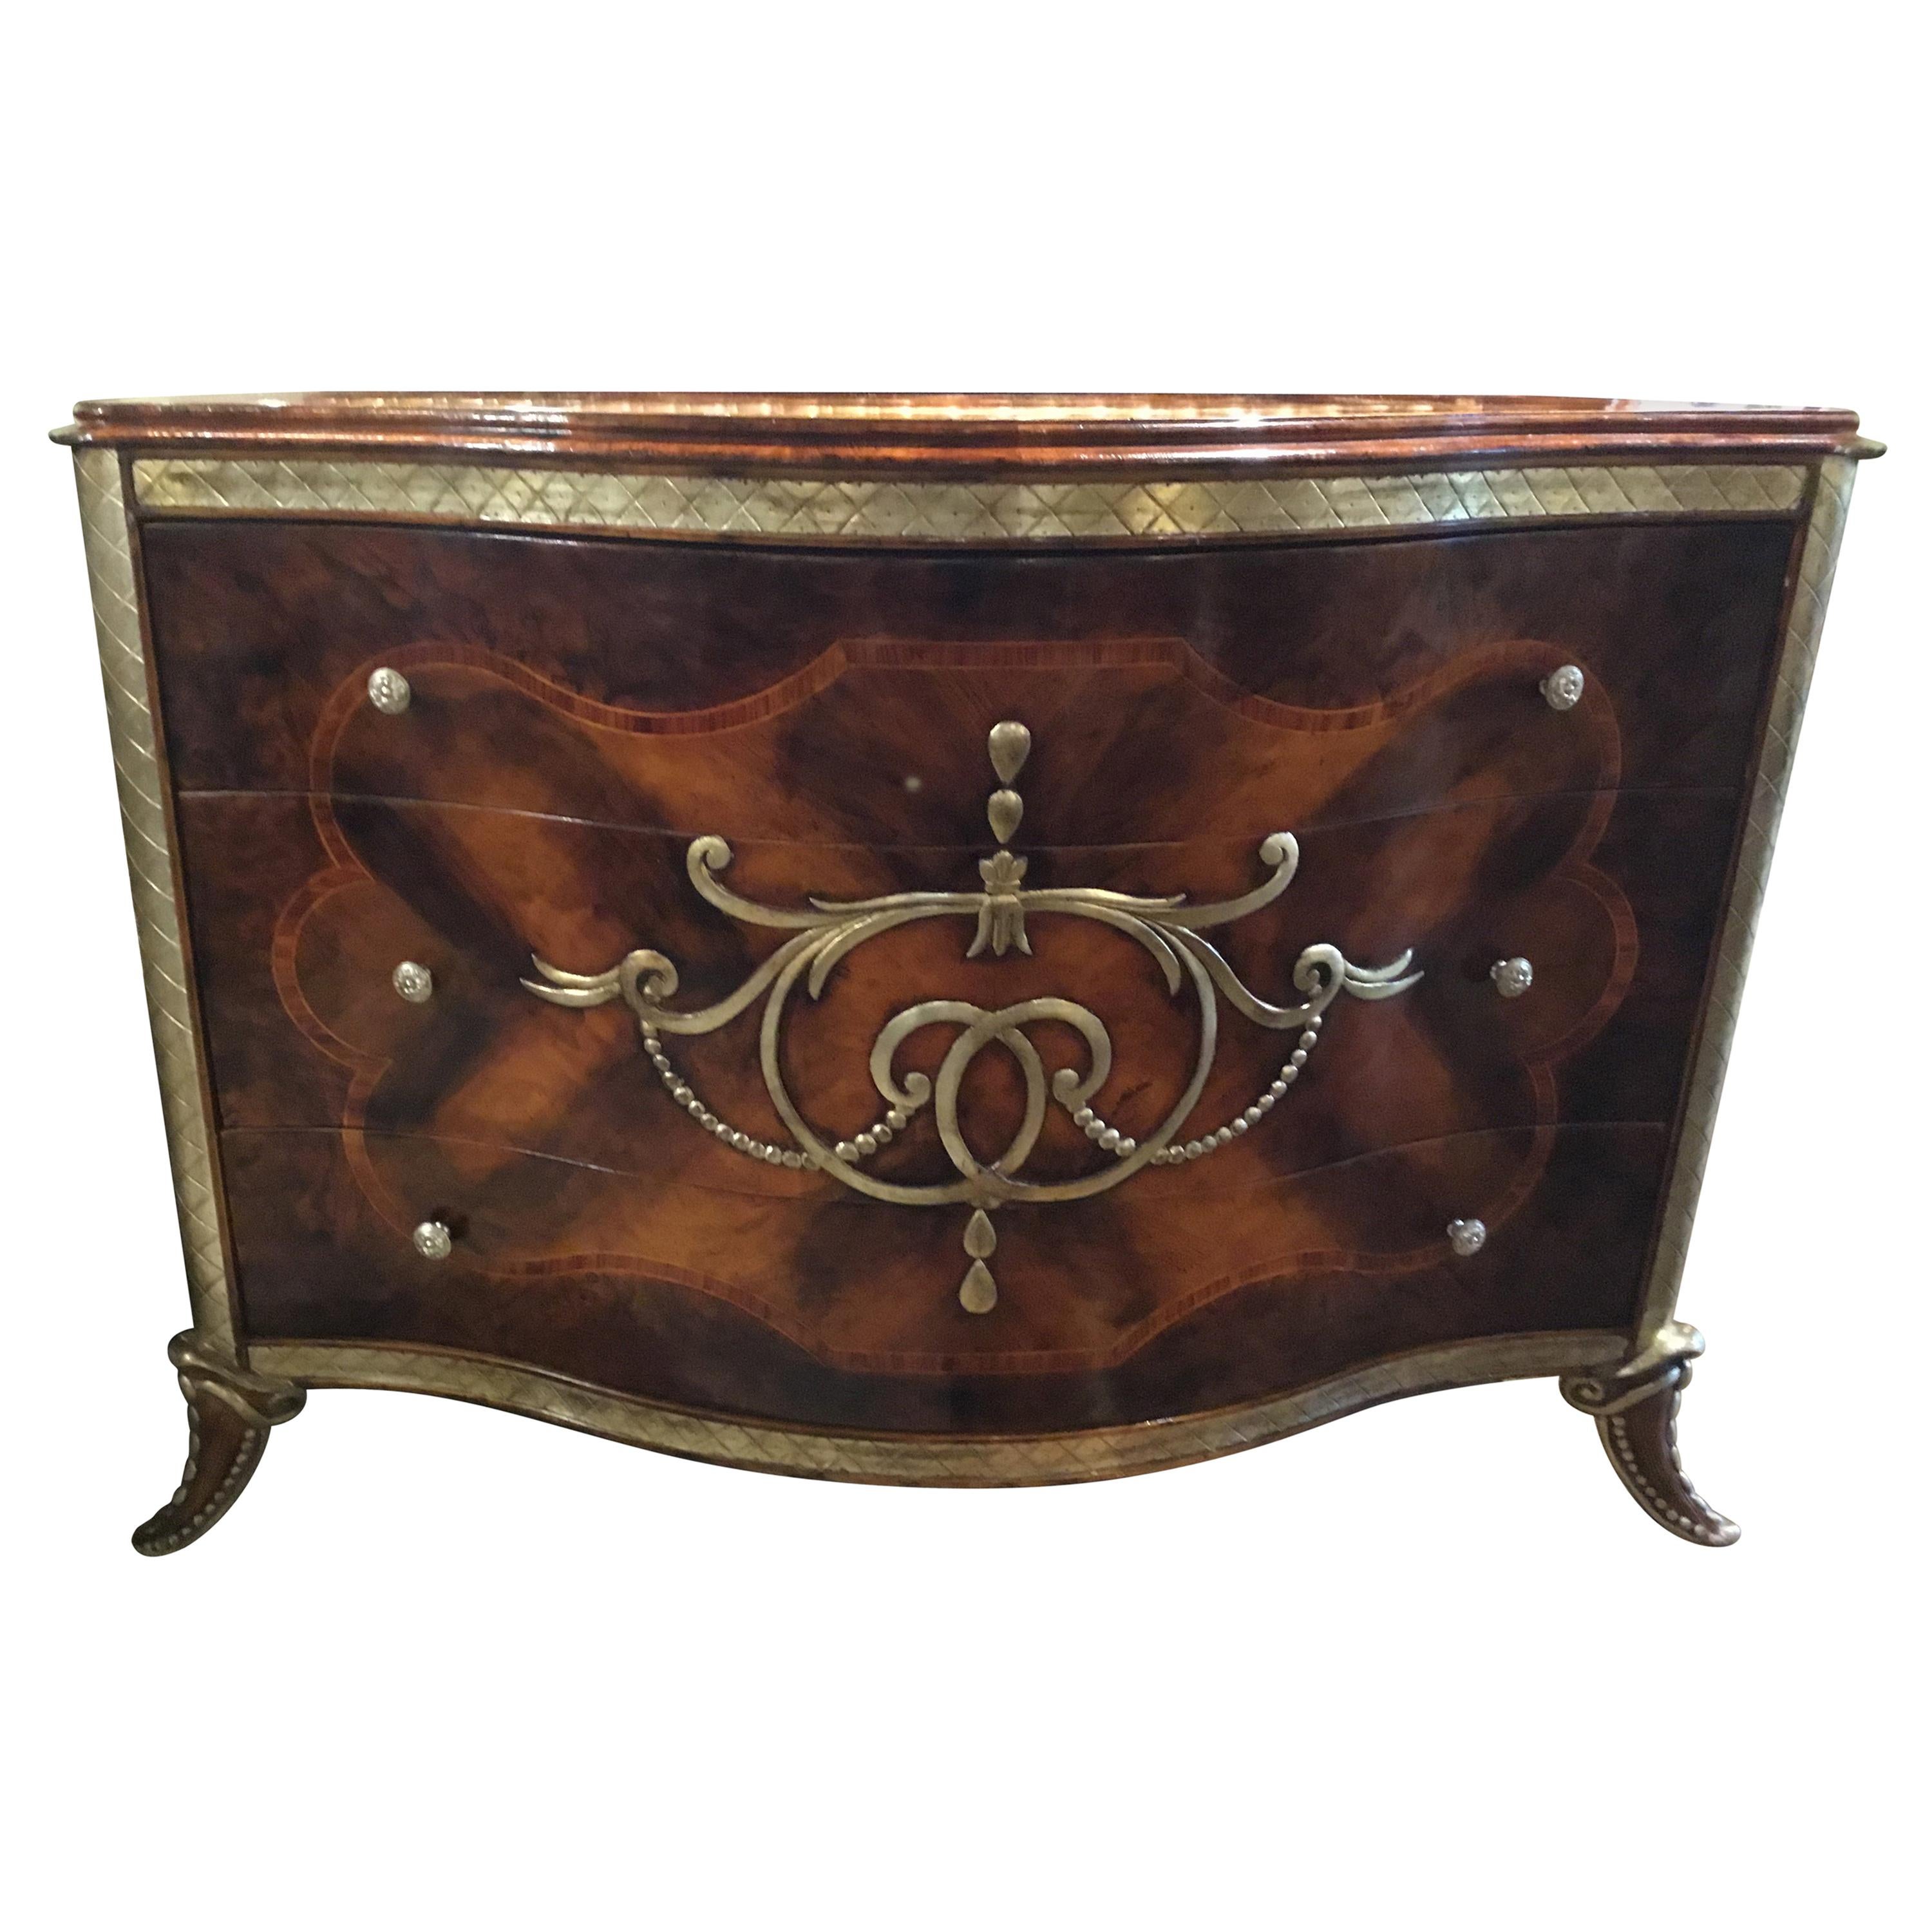 Italian Burled Walnut  Commode with silver accents, exceptional quality